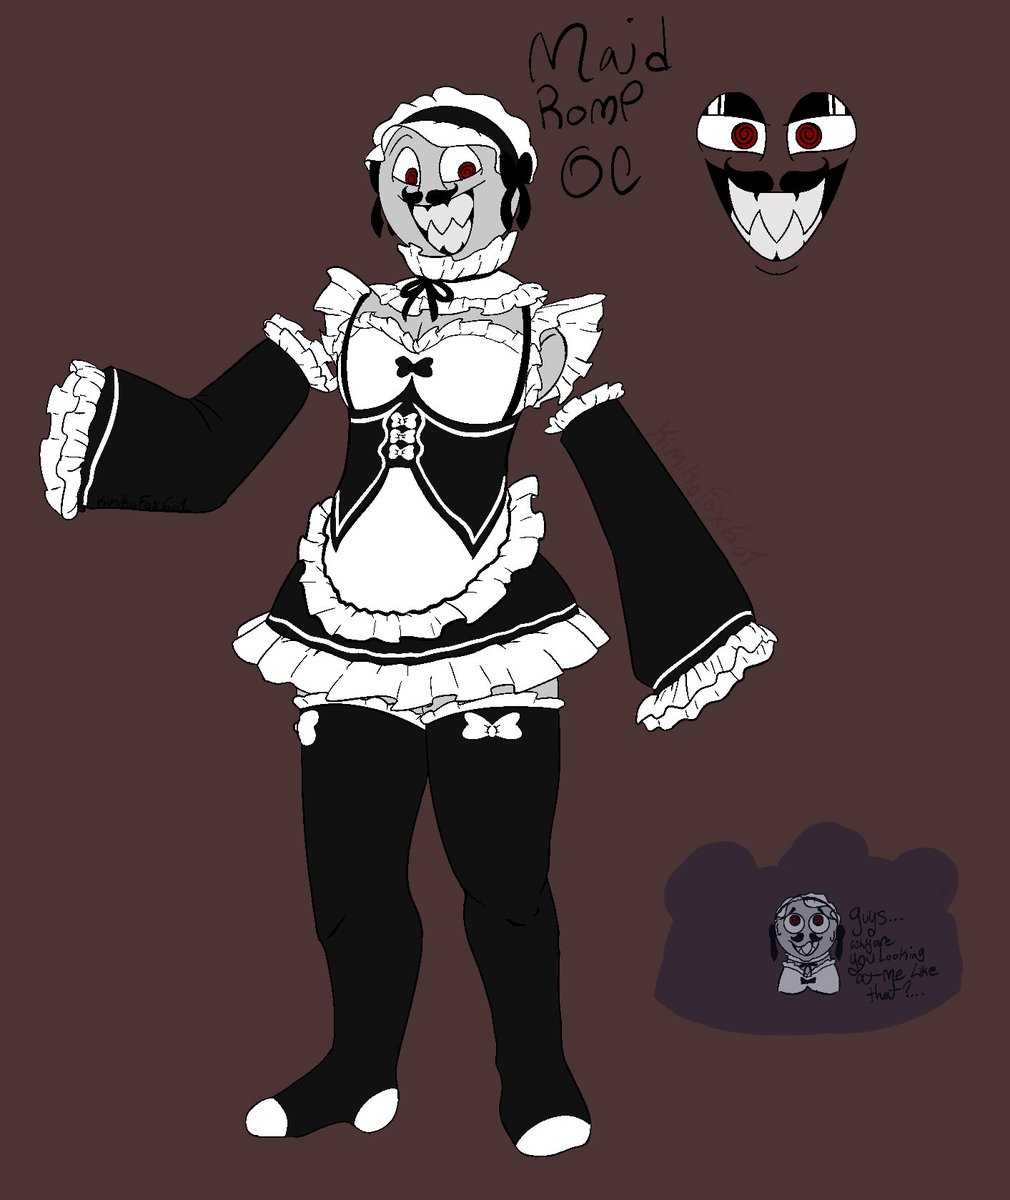 Meet the maid romp, cute and ready to clean lol
#madness_combat #madnessart #madnesscombatart #madnesscombat #romp